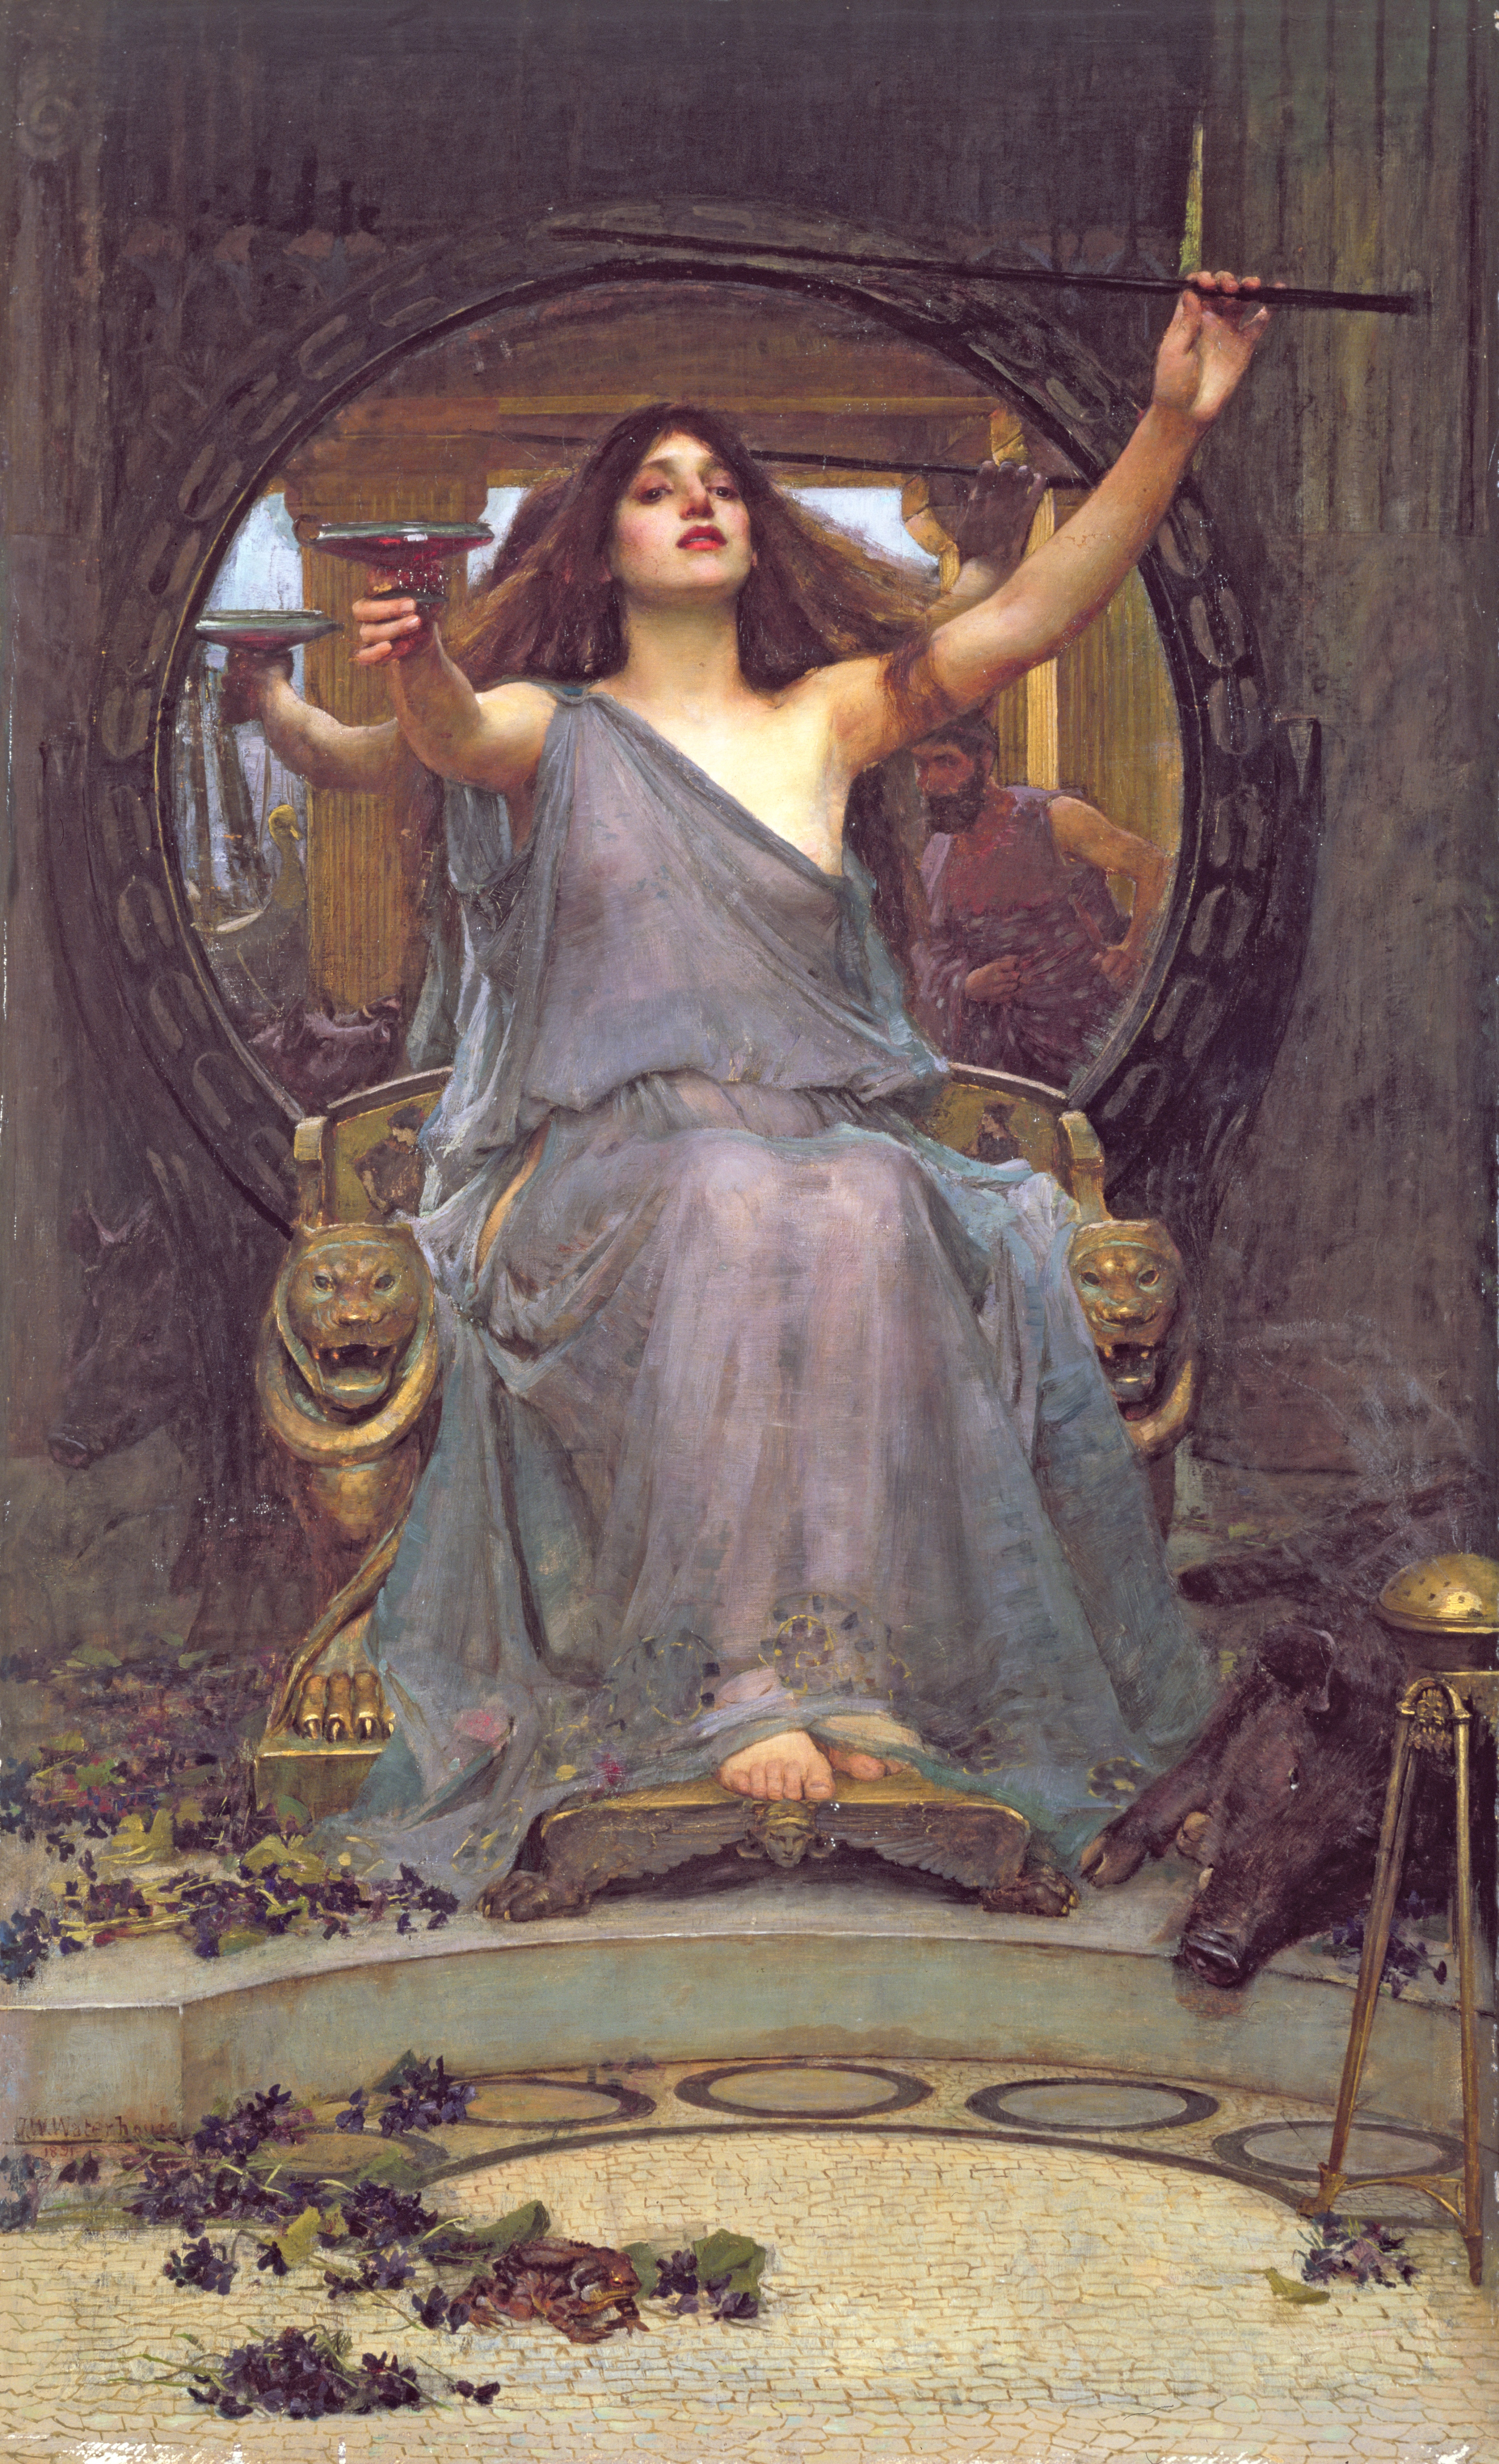 John William Waterhouse, Circe offering the cup to Ulysses, 1891, oil on canvas, © Gallery Oldham